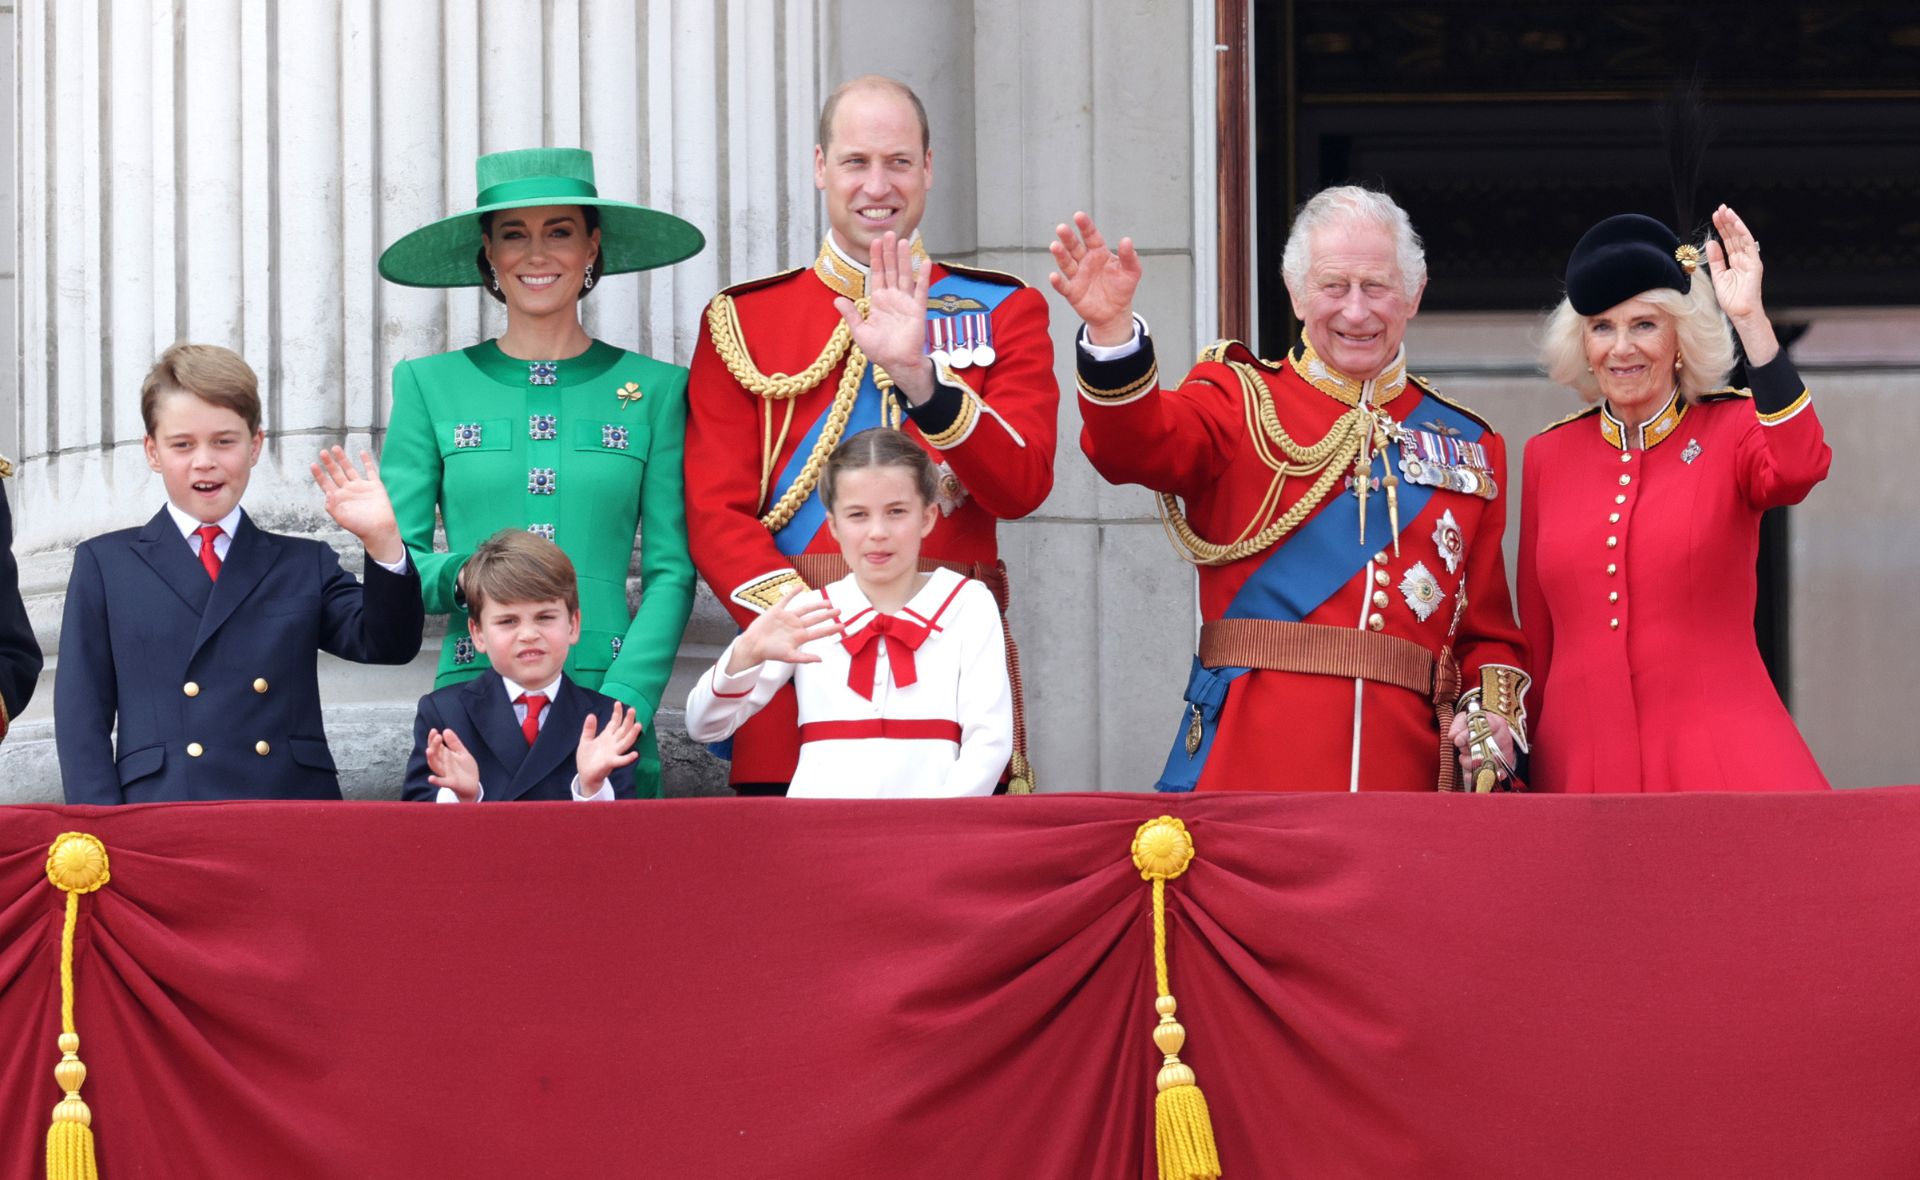 An in-depth guide of who’s currently in the British Royal Family